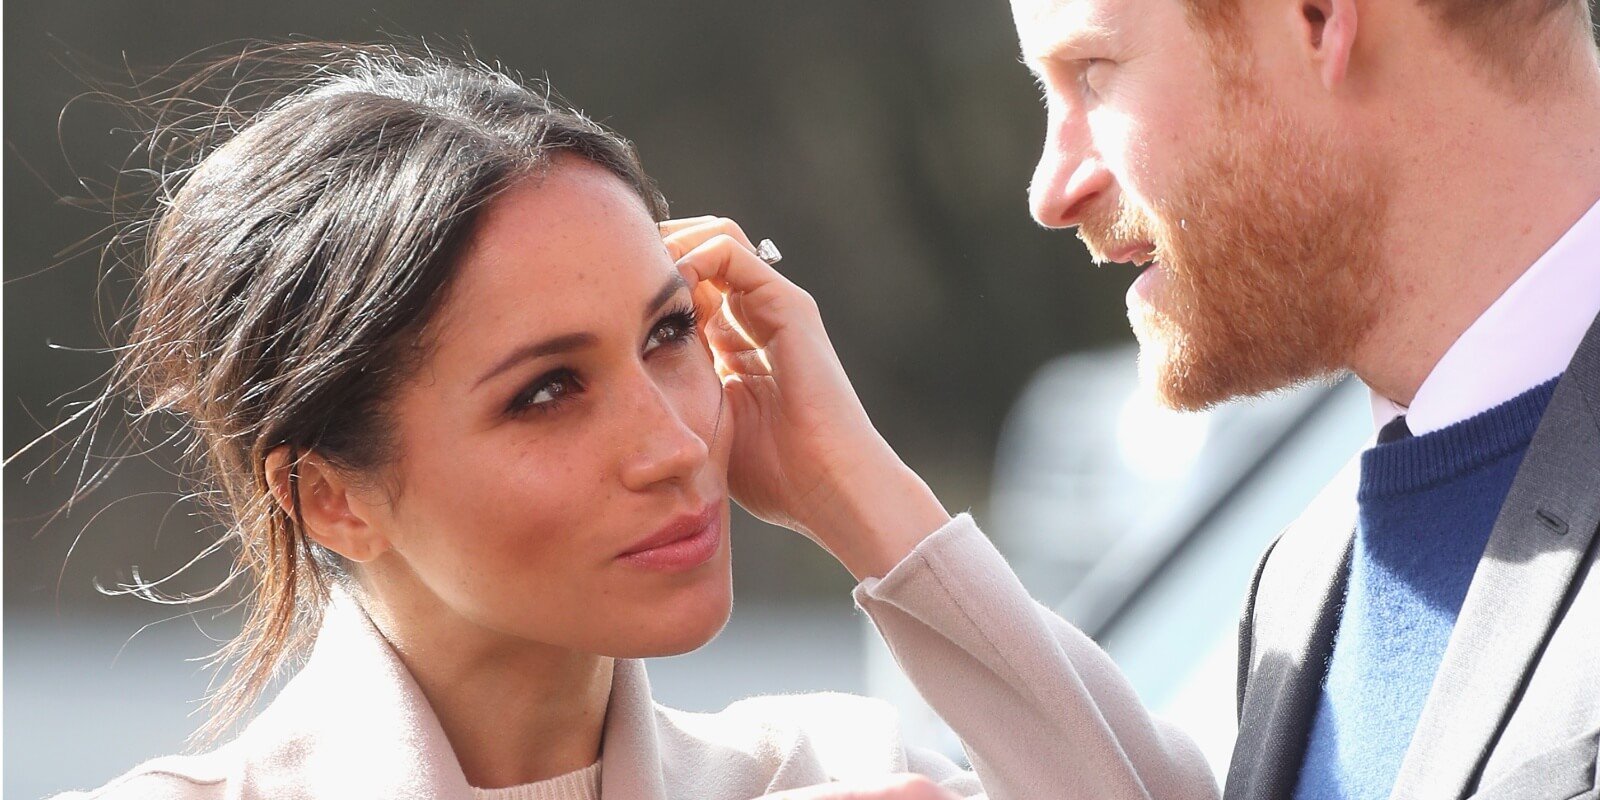 Meghan Markle and Prince Harry photographed in 2018 in Lisburn, Nothern Ireland.